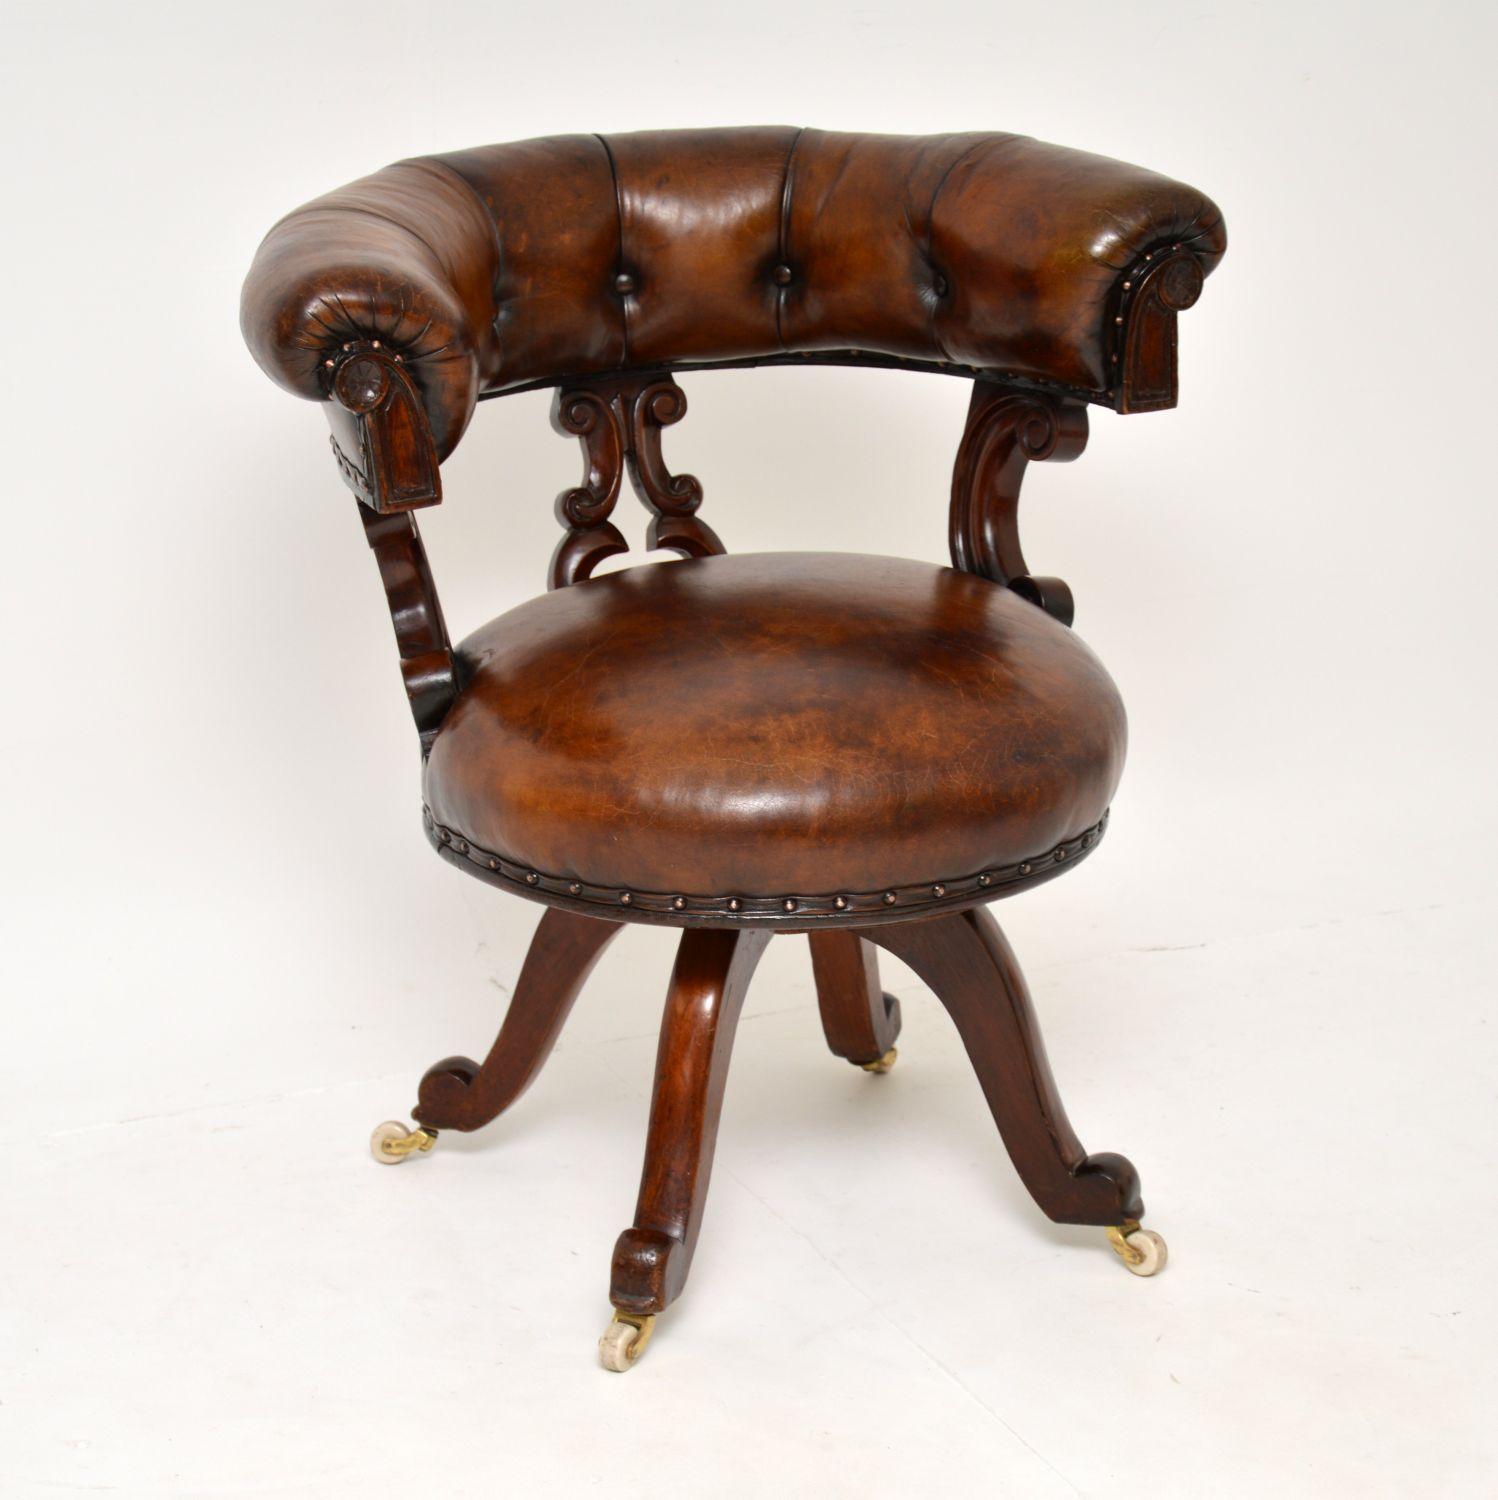 A fantastic and very rare antique William IV period swivel desk chair. This was made in England, it dates from around the 1840-1860’s.

This has a wonderful design, with very generous proportions and a beautifully carved wood frame. It sits on a